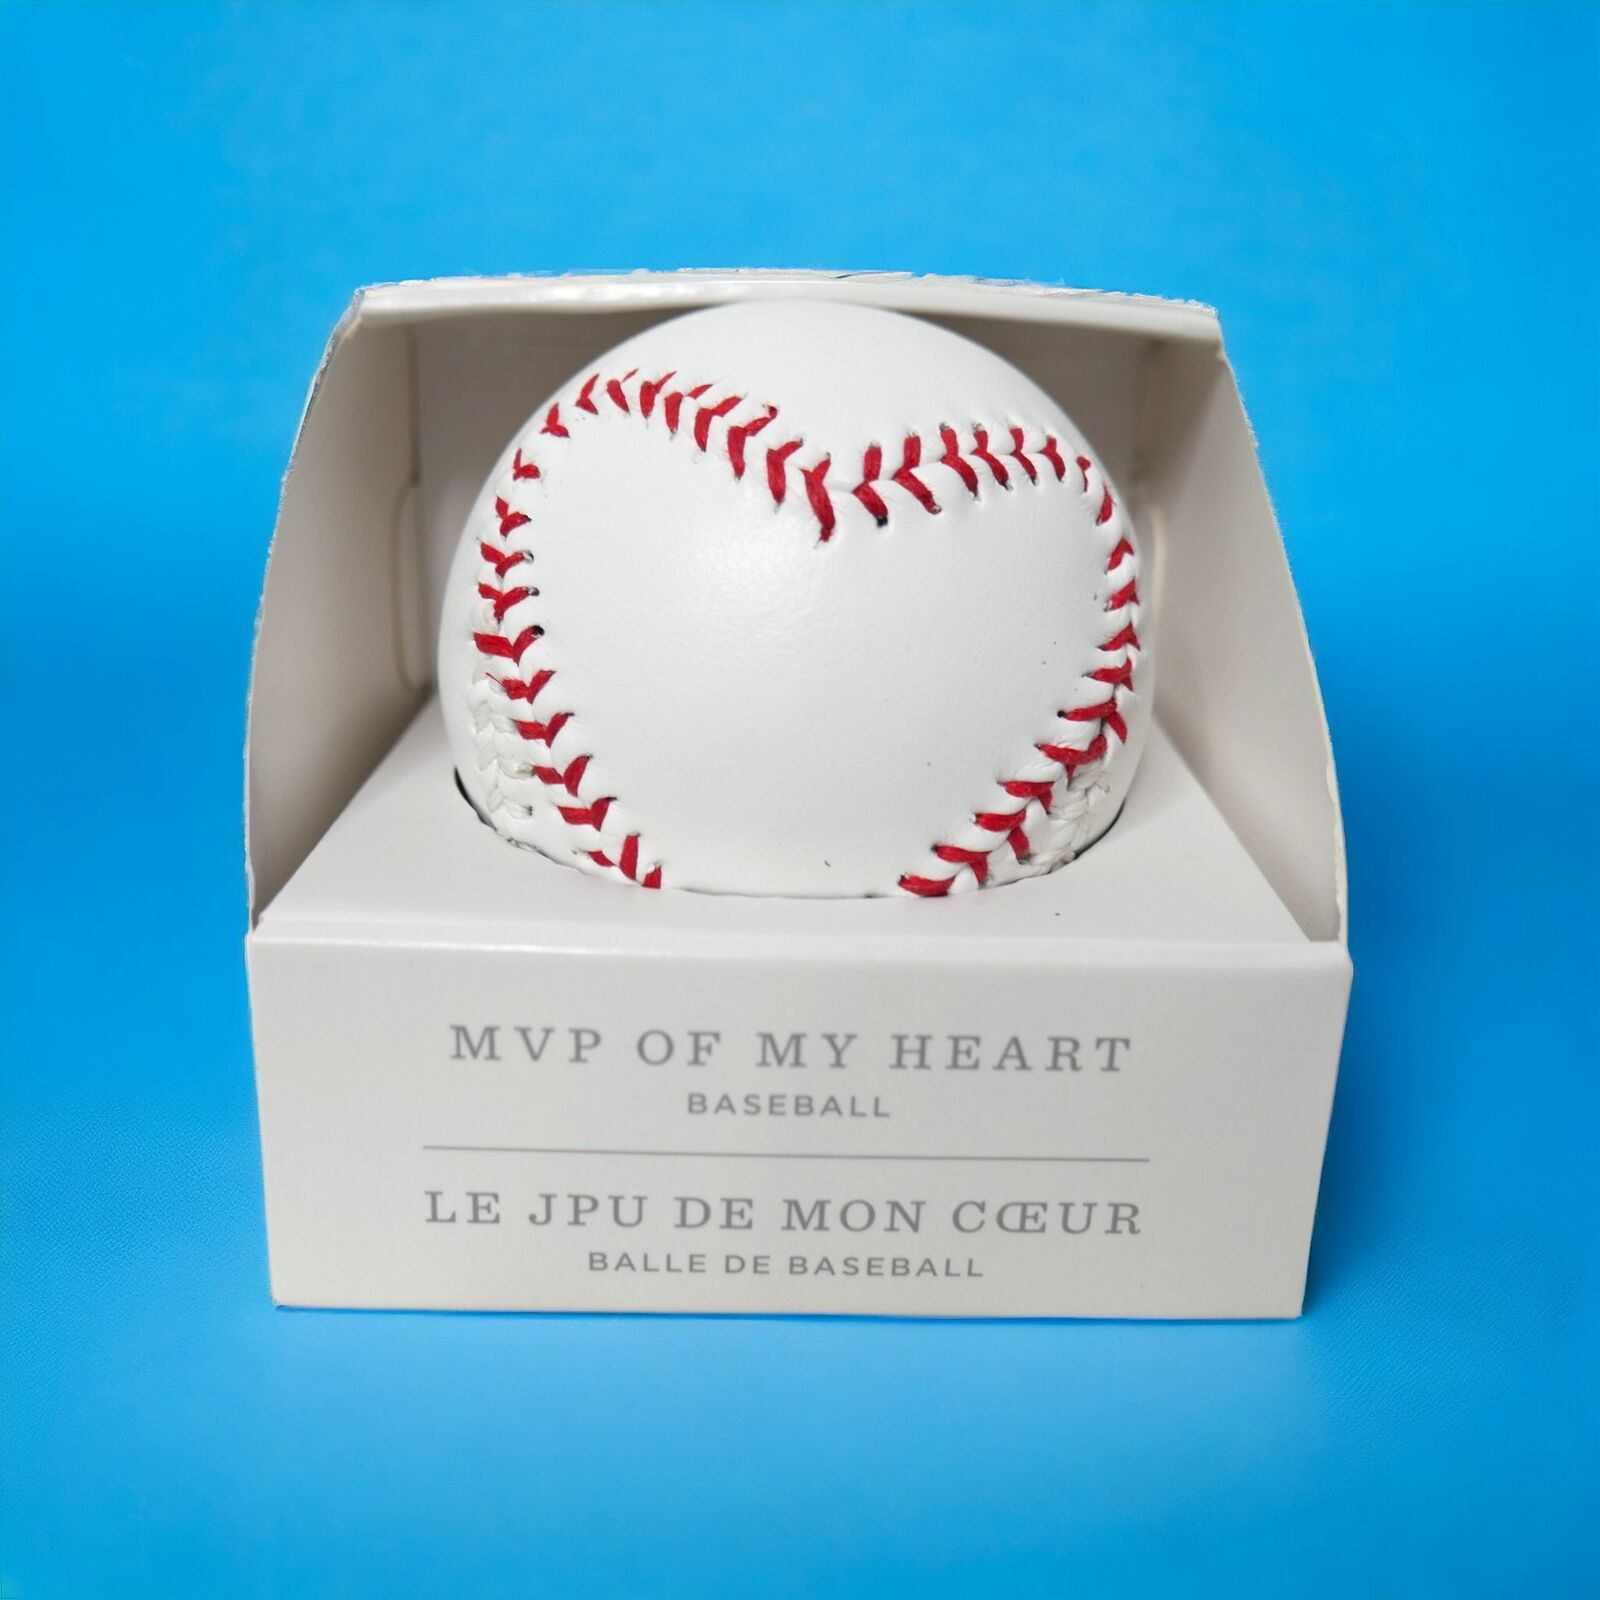 MVP OF MY HEART Stitched BASEBALL Player Hallmark Easter Basket Gift NEW IN BOX